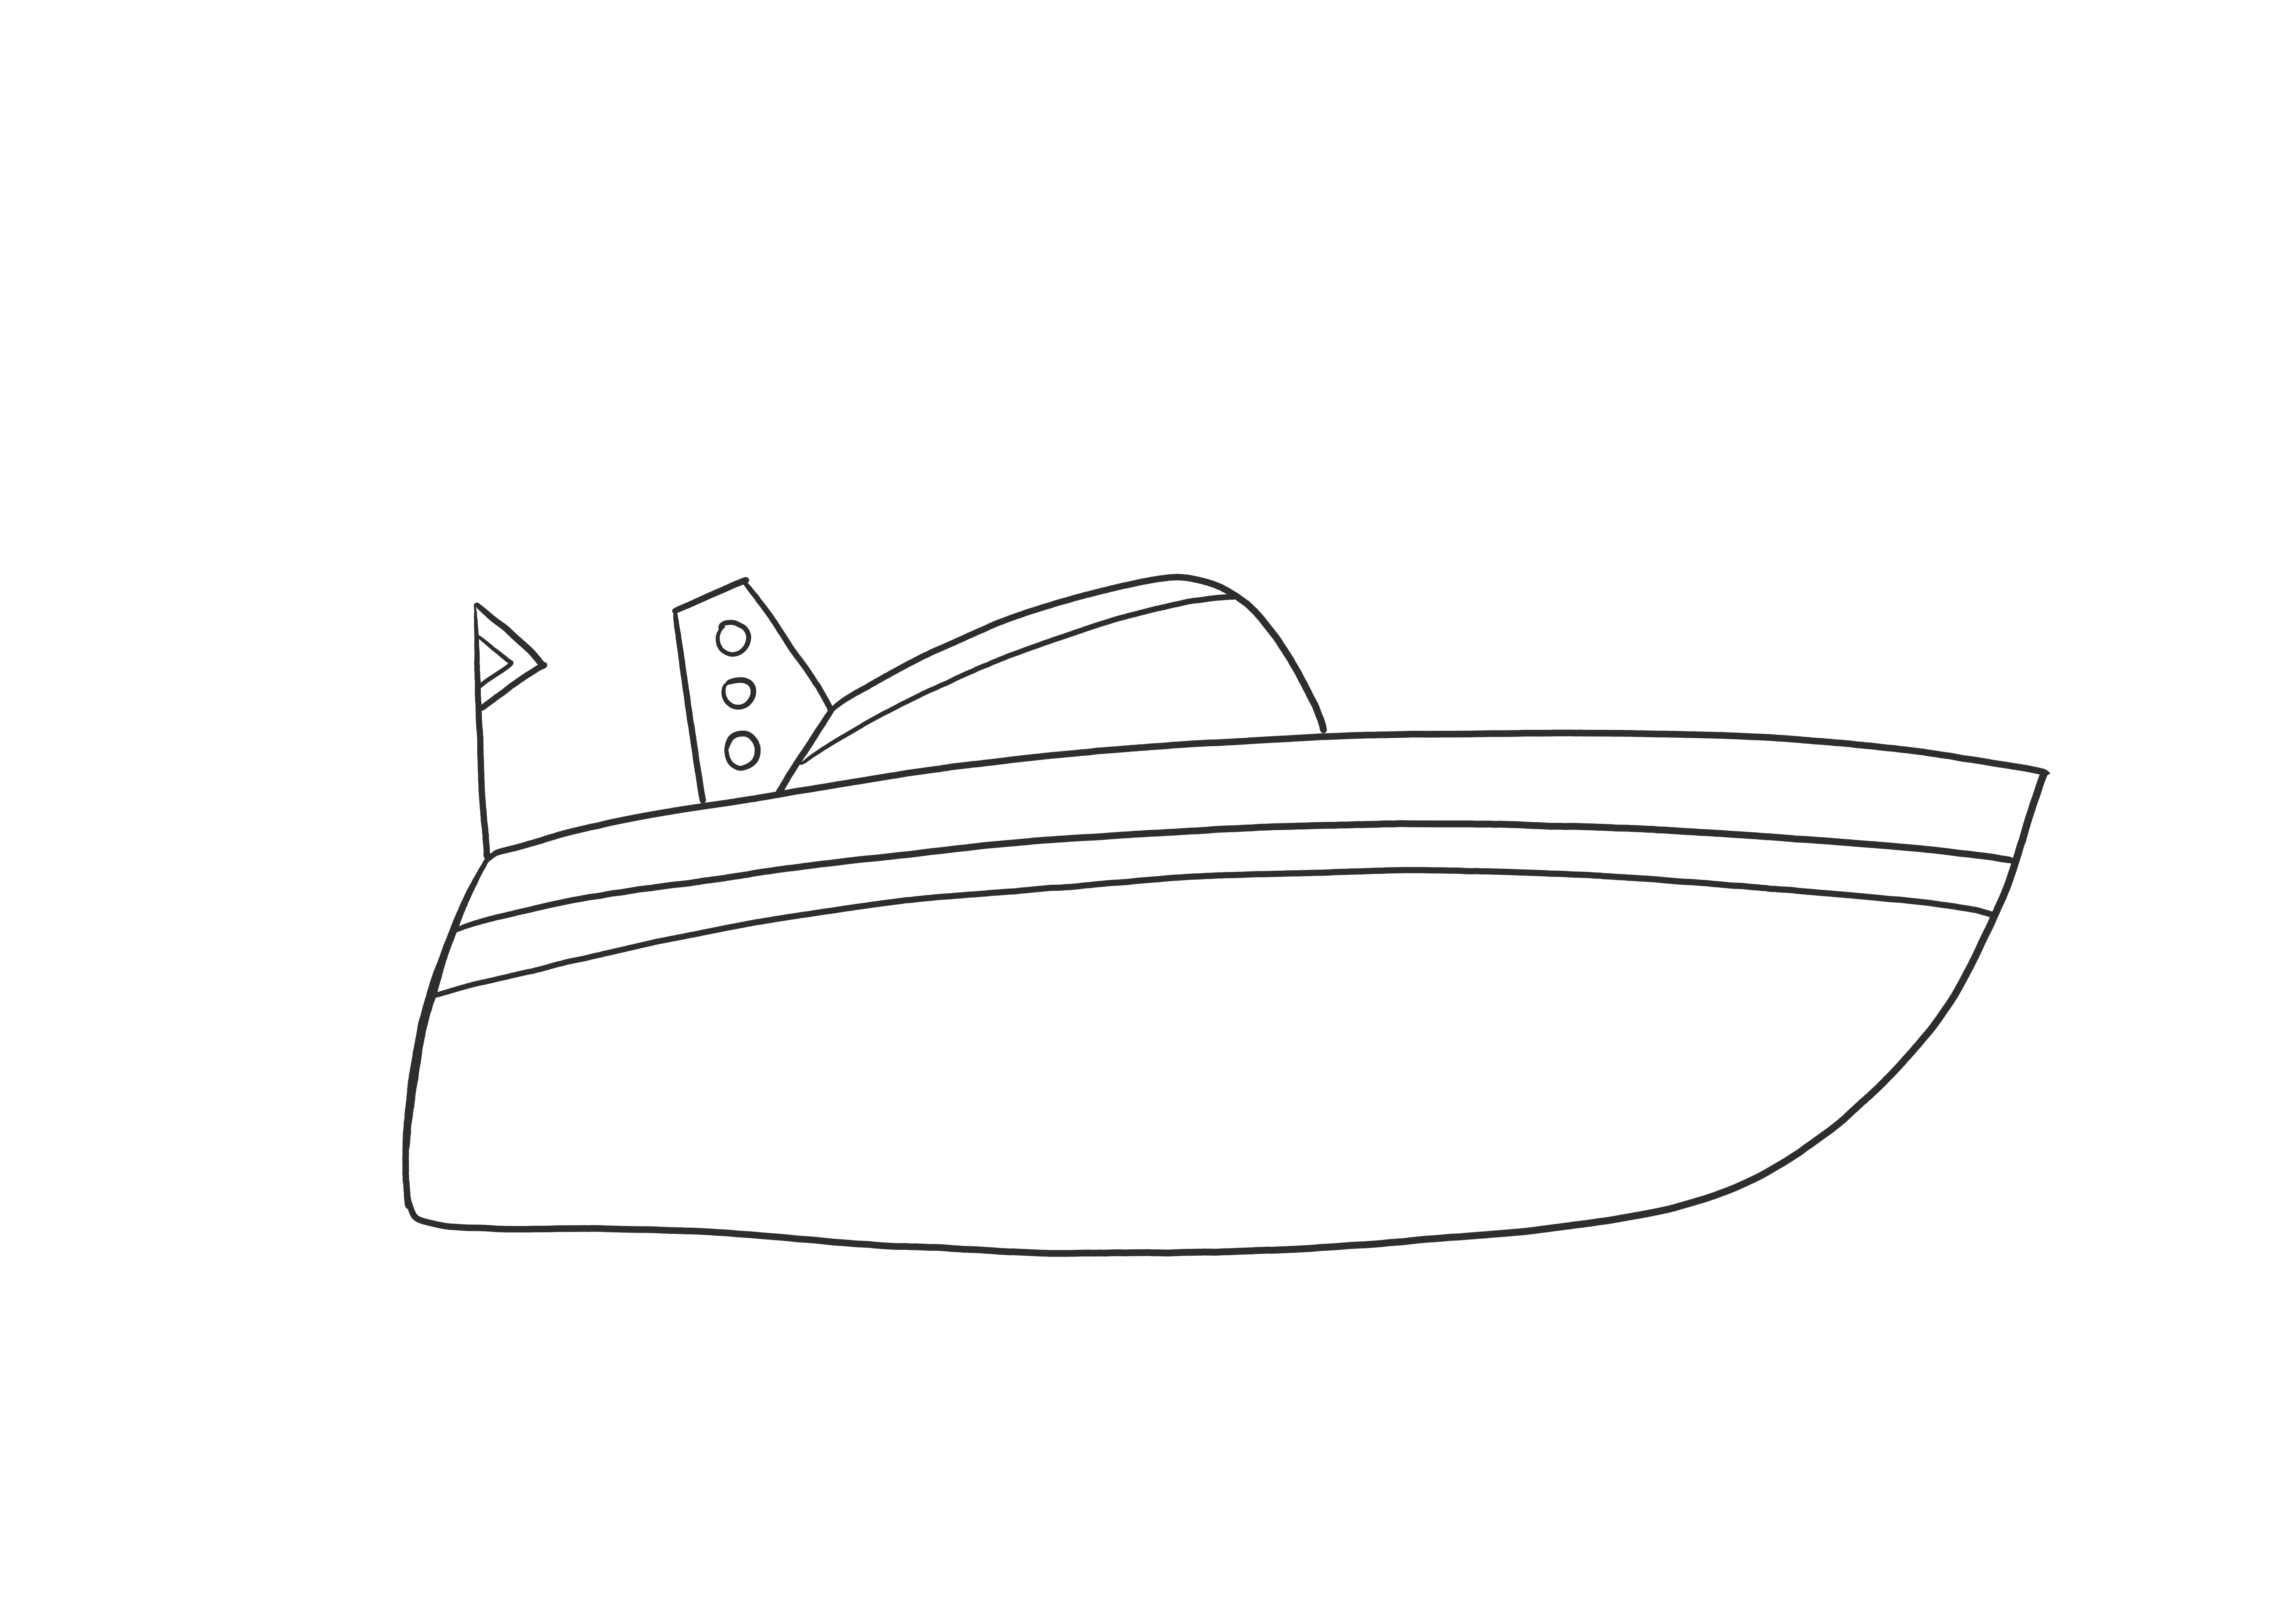 Super cool speed boat for boat lovers to print for free and color